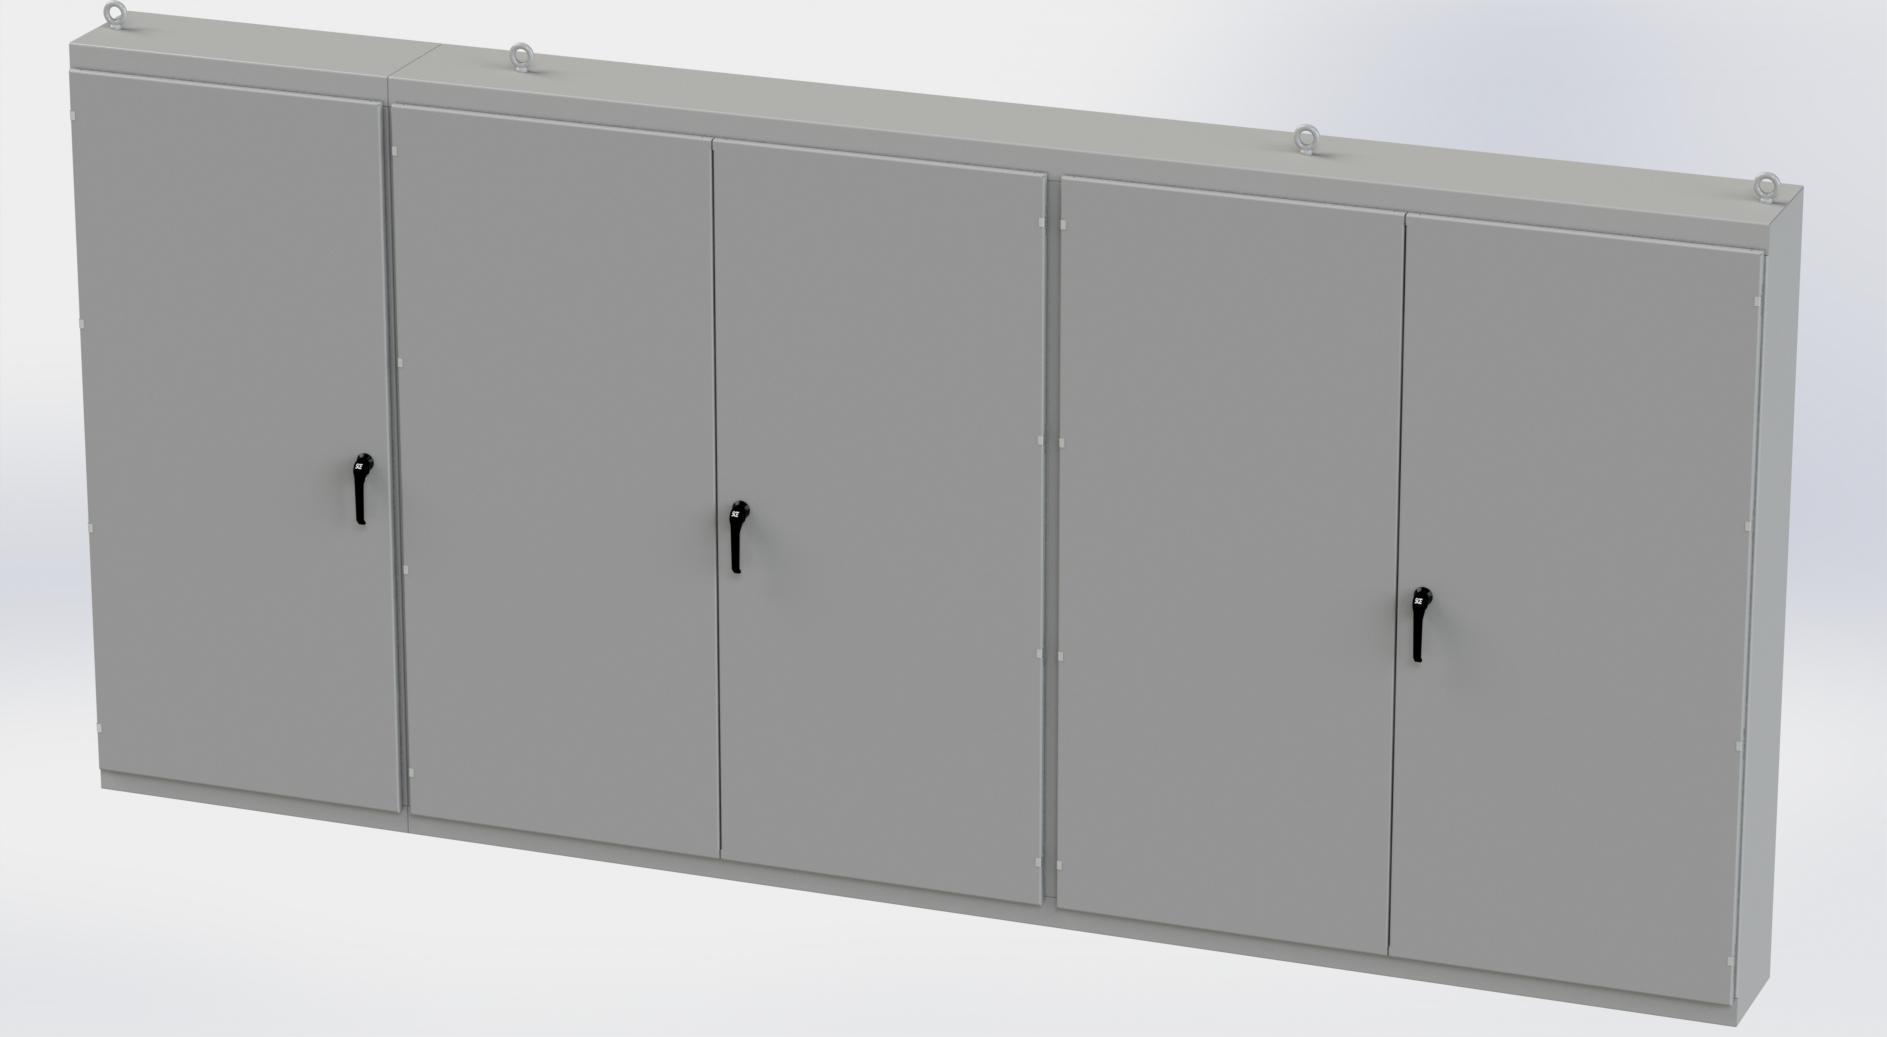 Saginaw Control SCE-86M5E Enclosure, Multi-Door, Height:86.00", Width:187.00", Depth:14.00", ANSI-61 gray powder coating inside and out. Sub-panels are powder coated white.